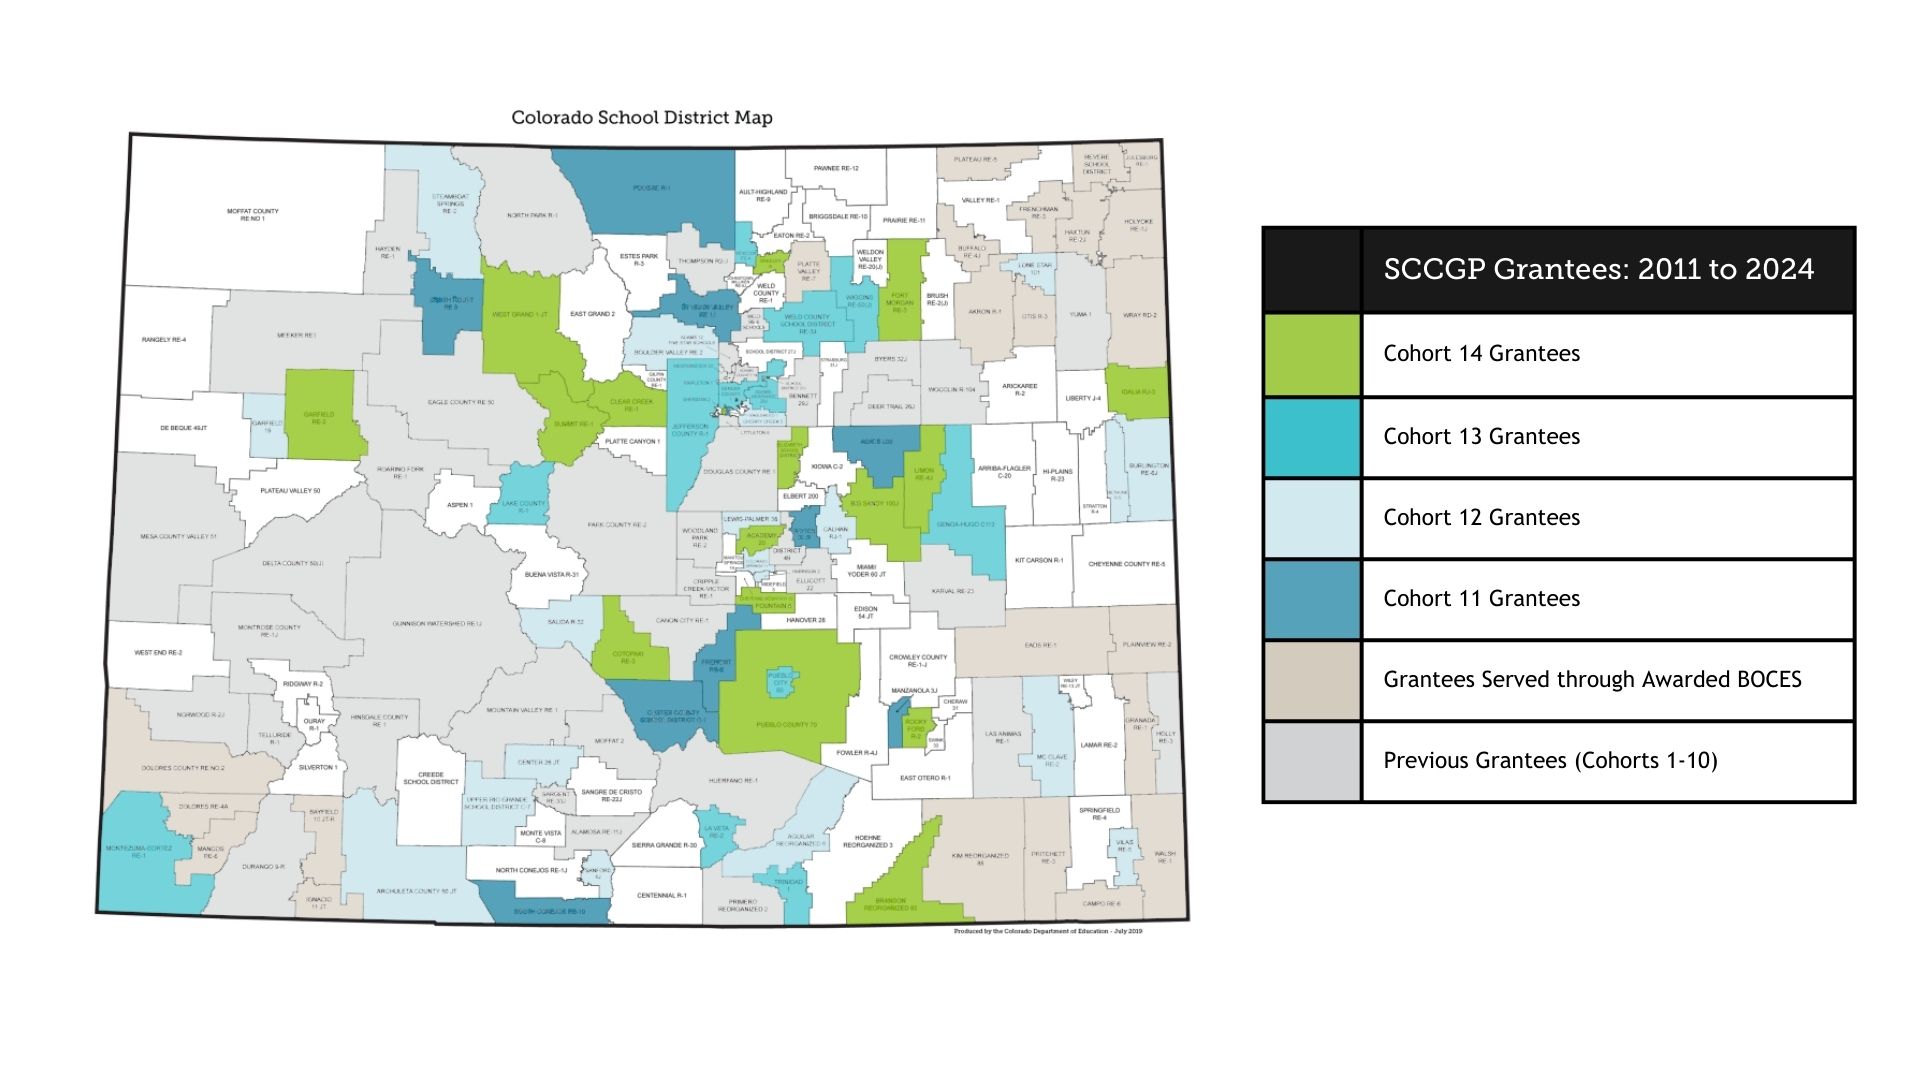 SCCG Grantee Map from 2011 to 2024